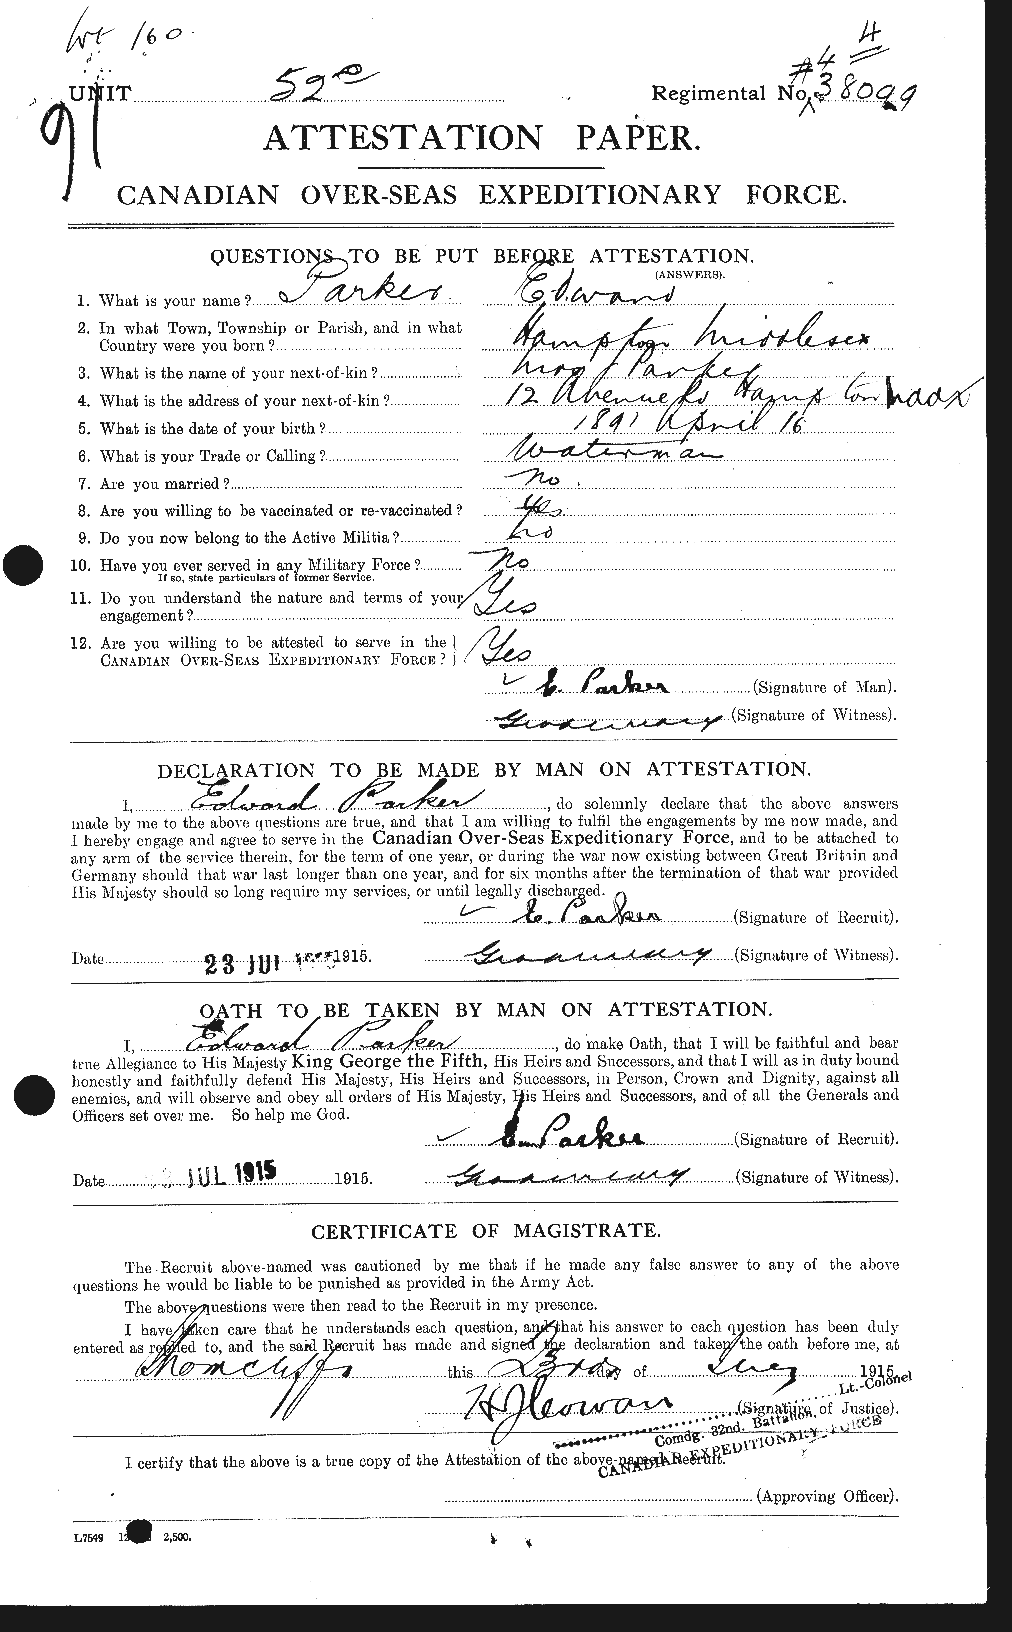 Personnel Records of the First World War - CEF 565131a